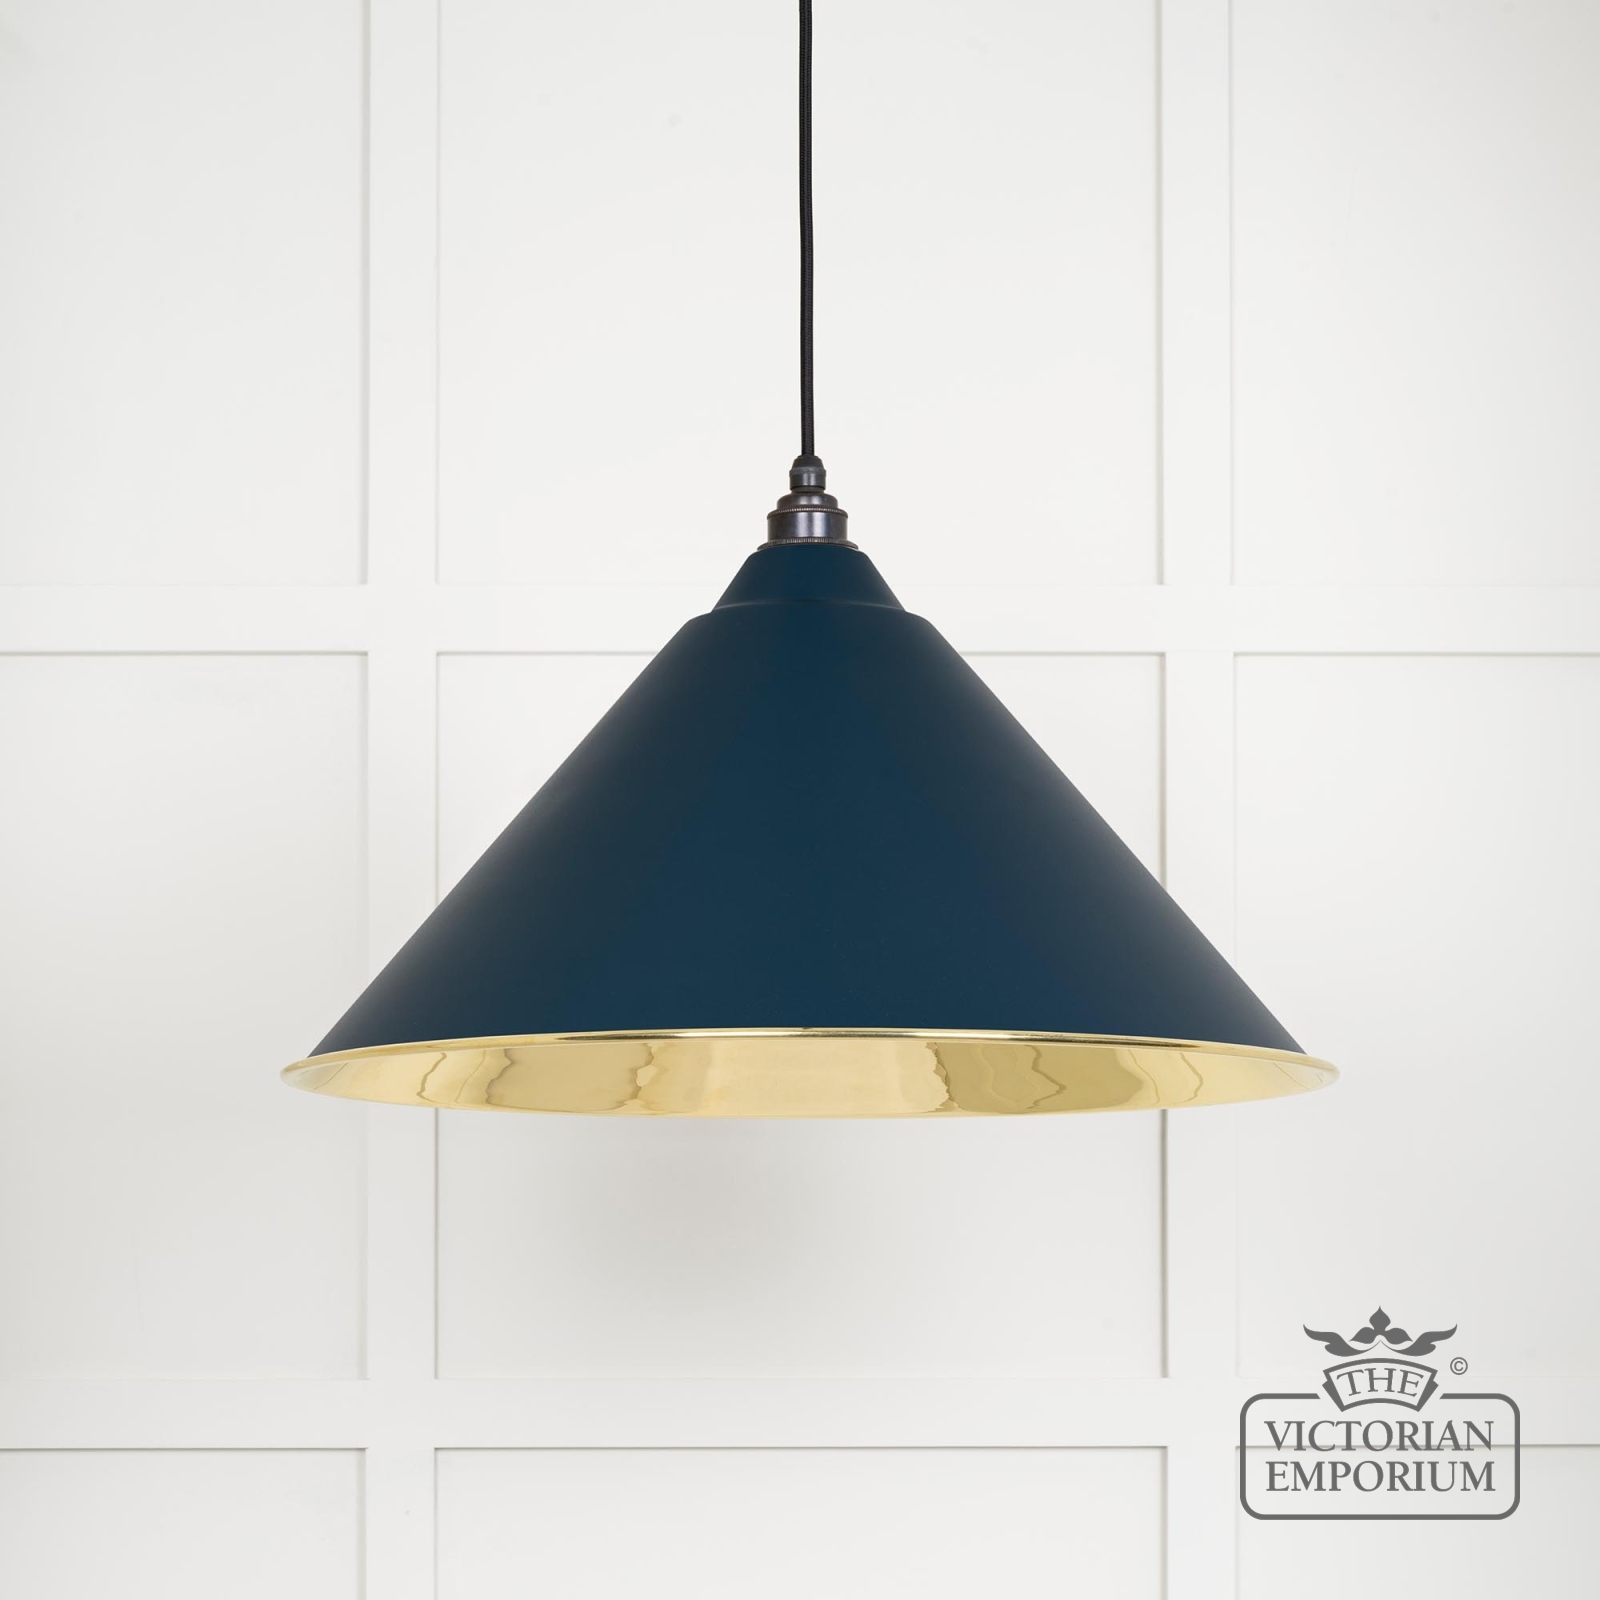 Hockliffe pendant light in Dusk and Smooth Brass